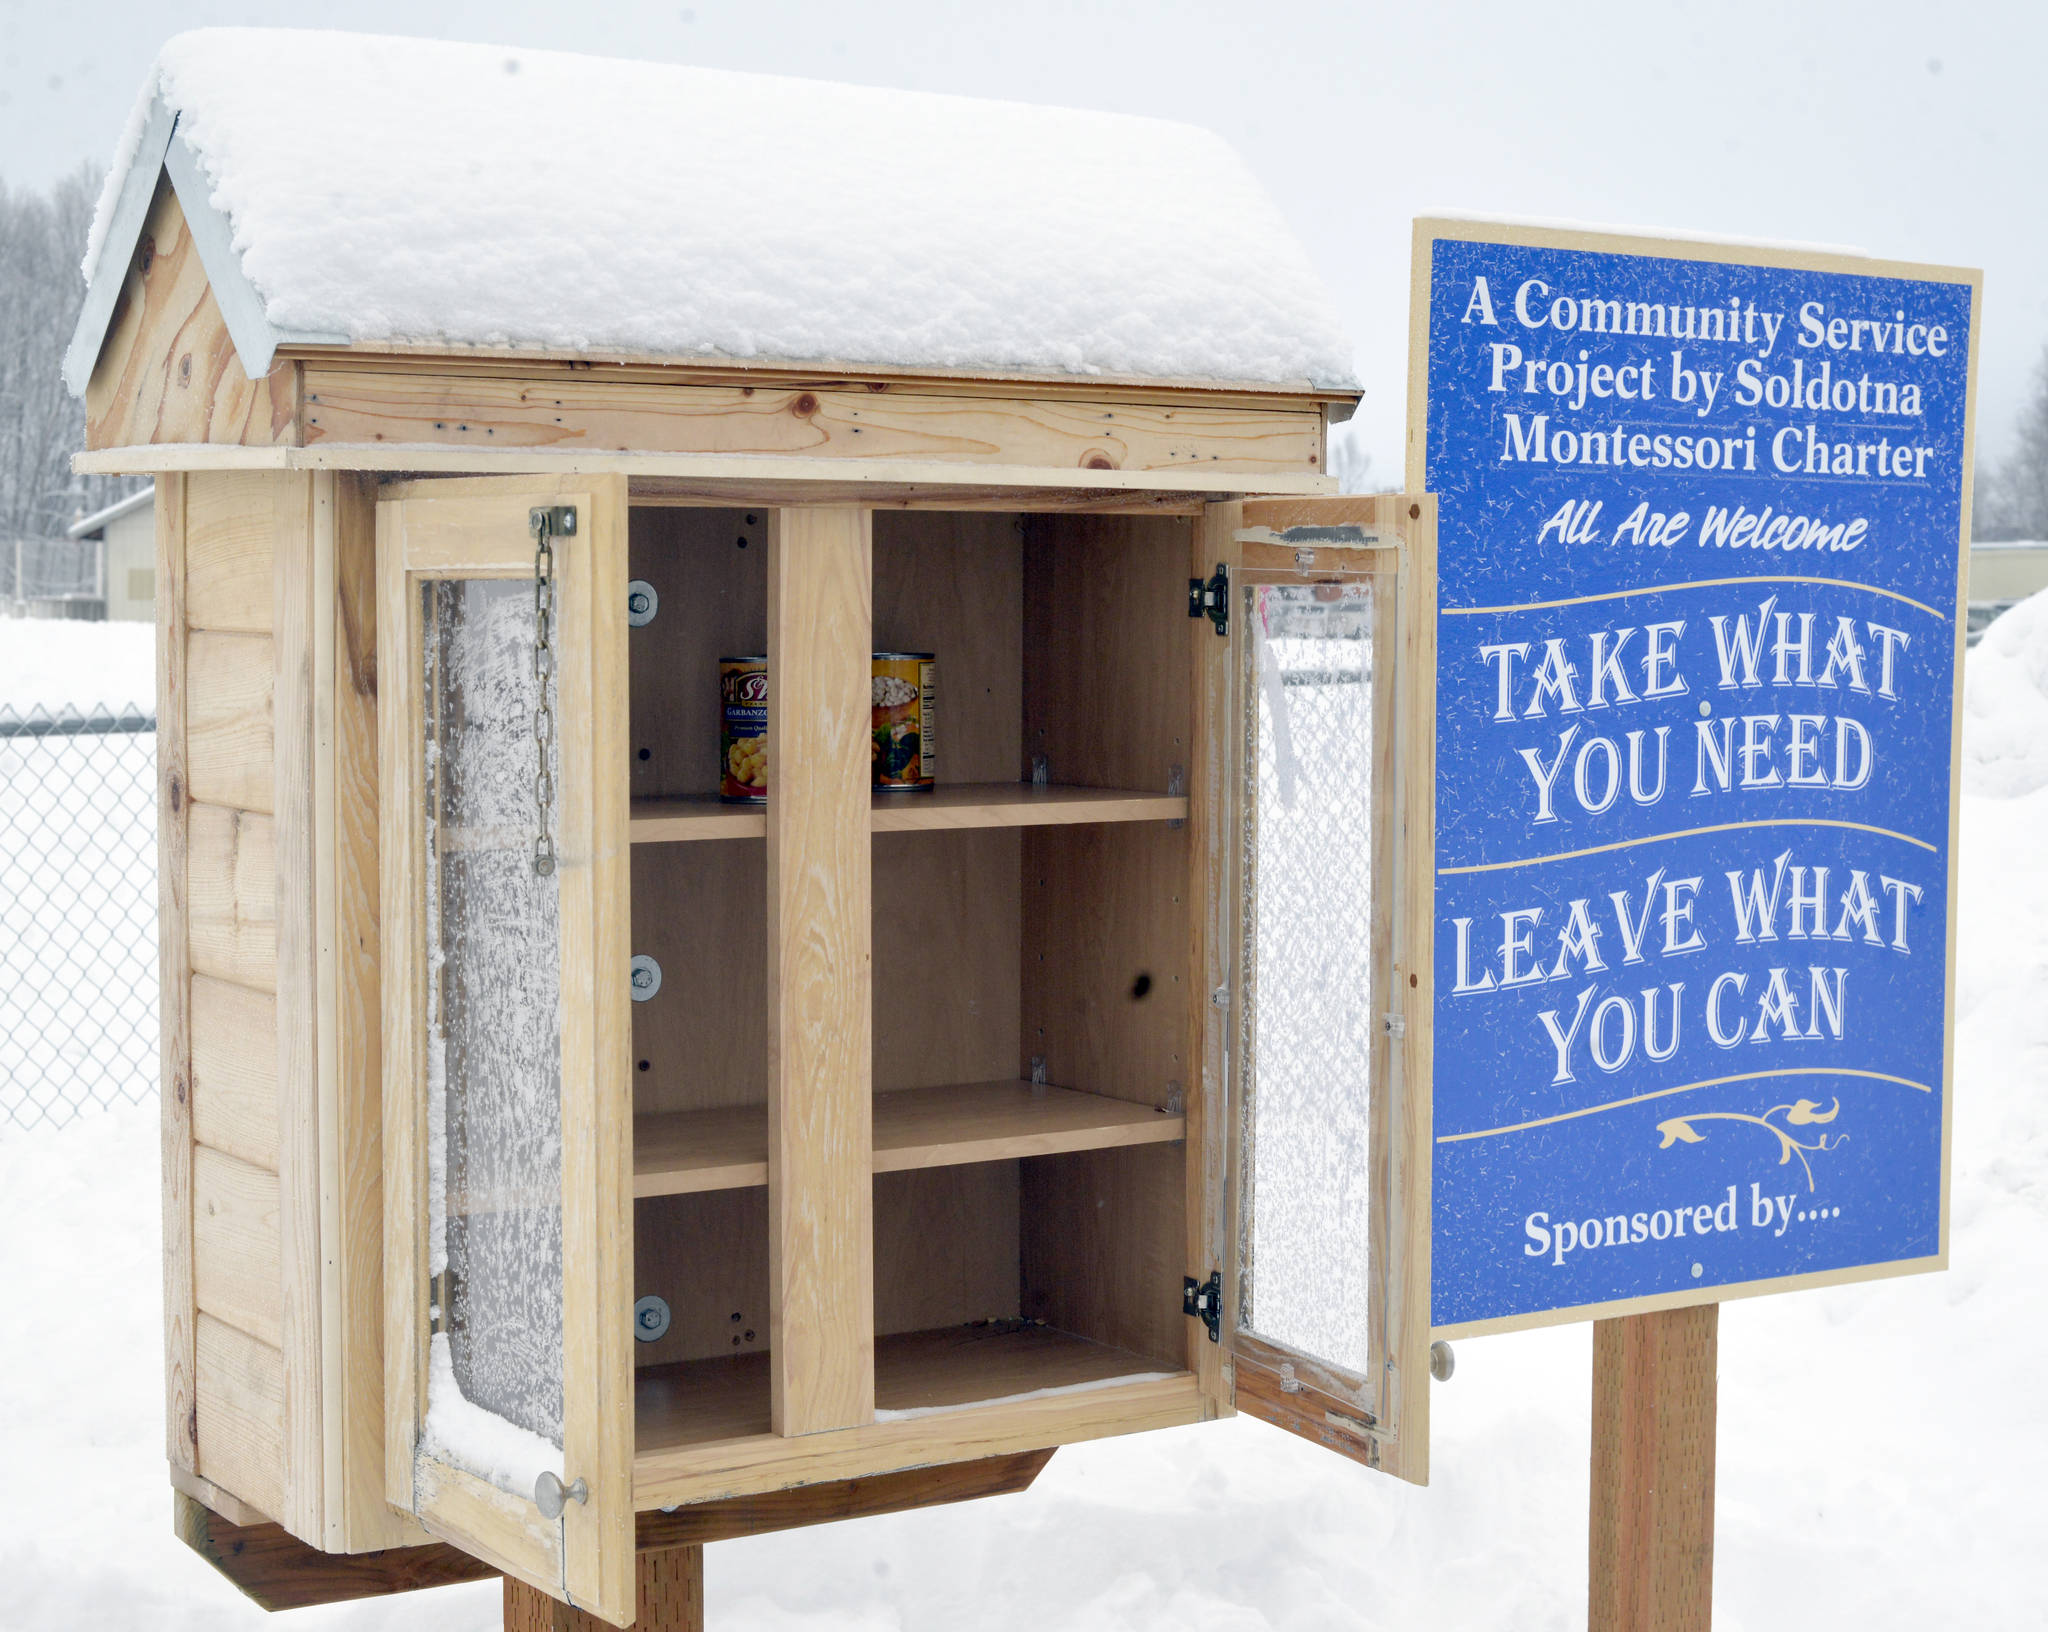 The Soldotna Montessori Charter School food pantry is located on the corner of North Binkley Street and East Park Avenue, right across the street from the Kenai Peninsula Borough Hall building. (Photo by Kat Sorensen/Peninsula Clarion)